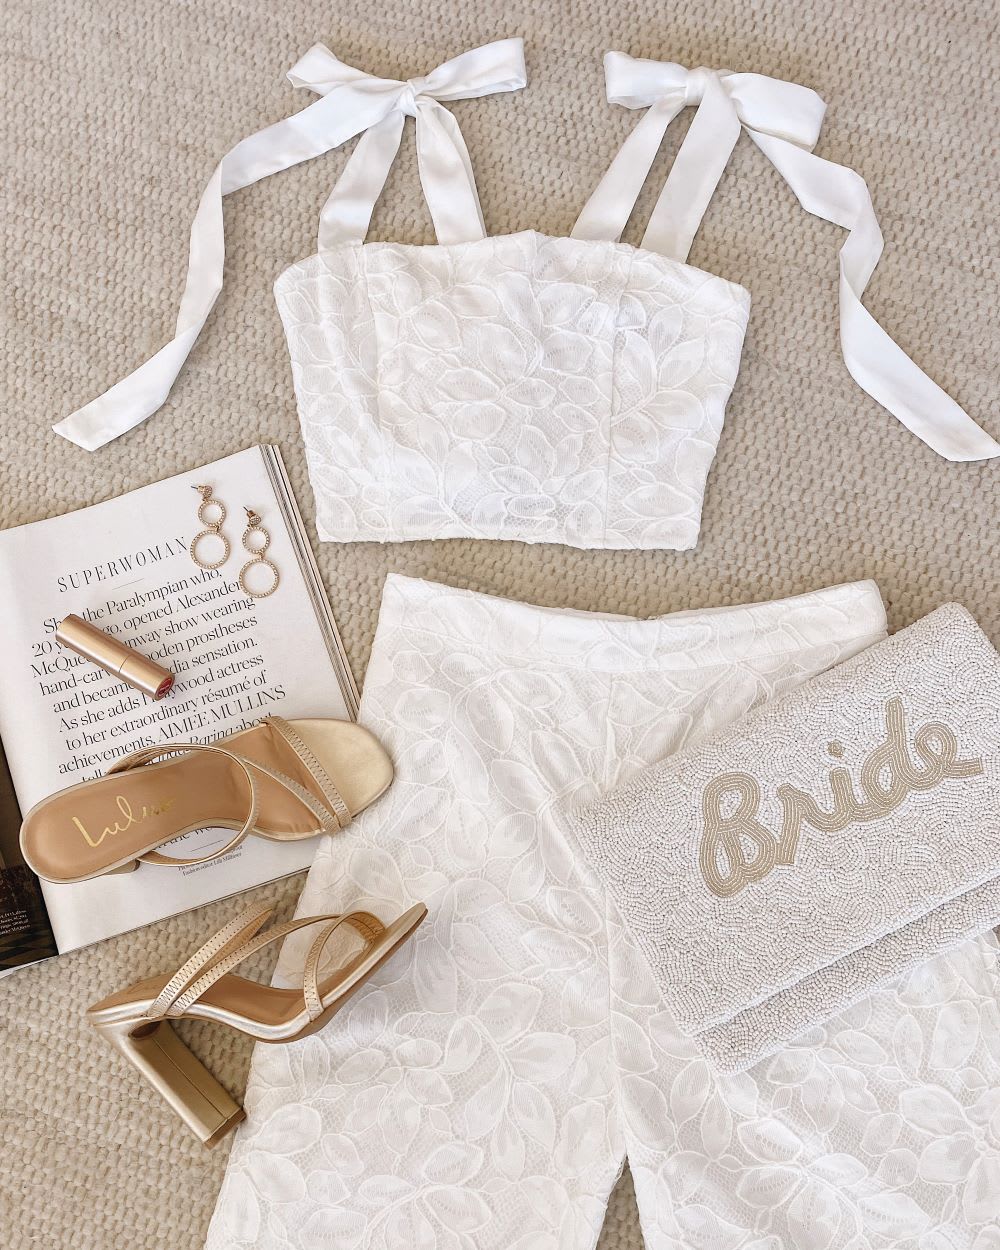 Bridal Guide: 20 Stylish Rehearsal Dinner Outfit Ideas to Nail